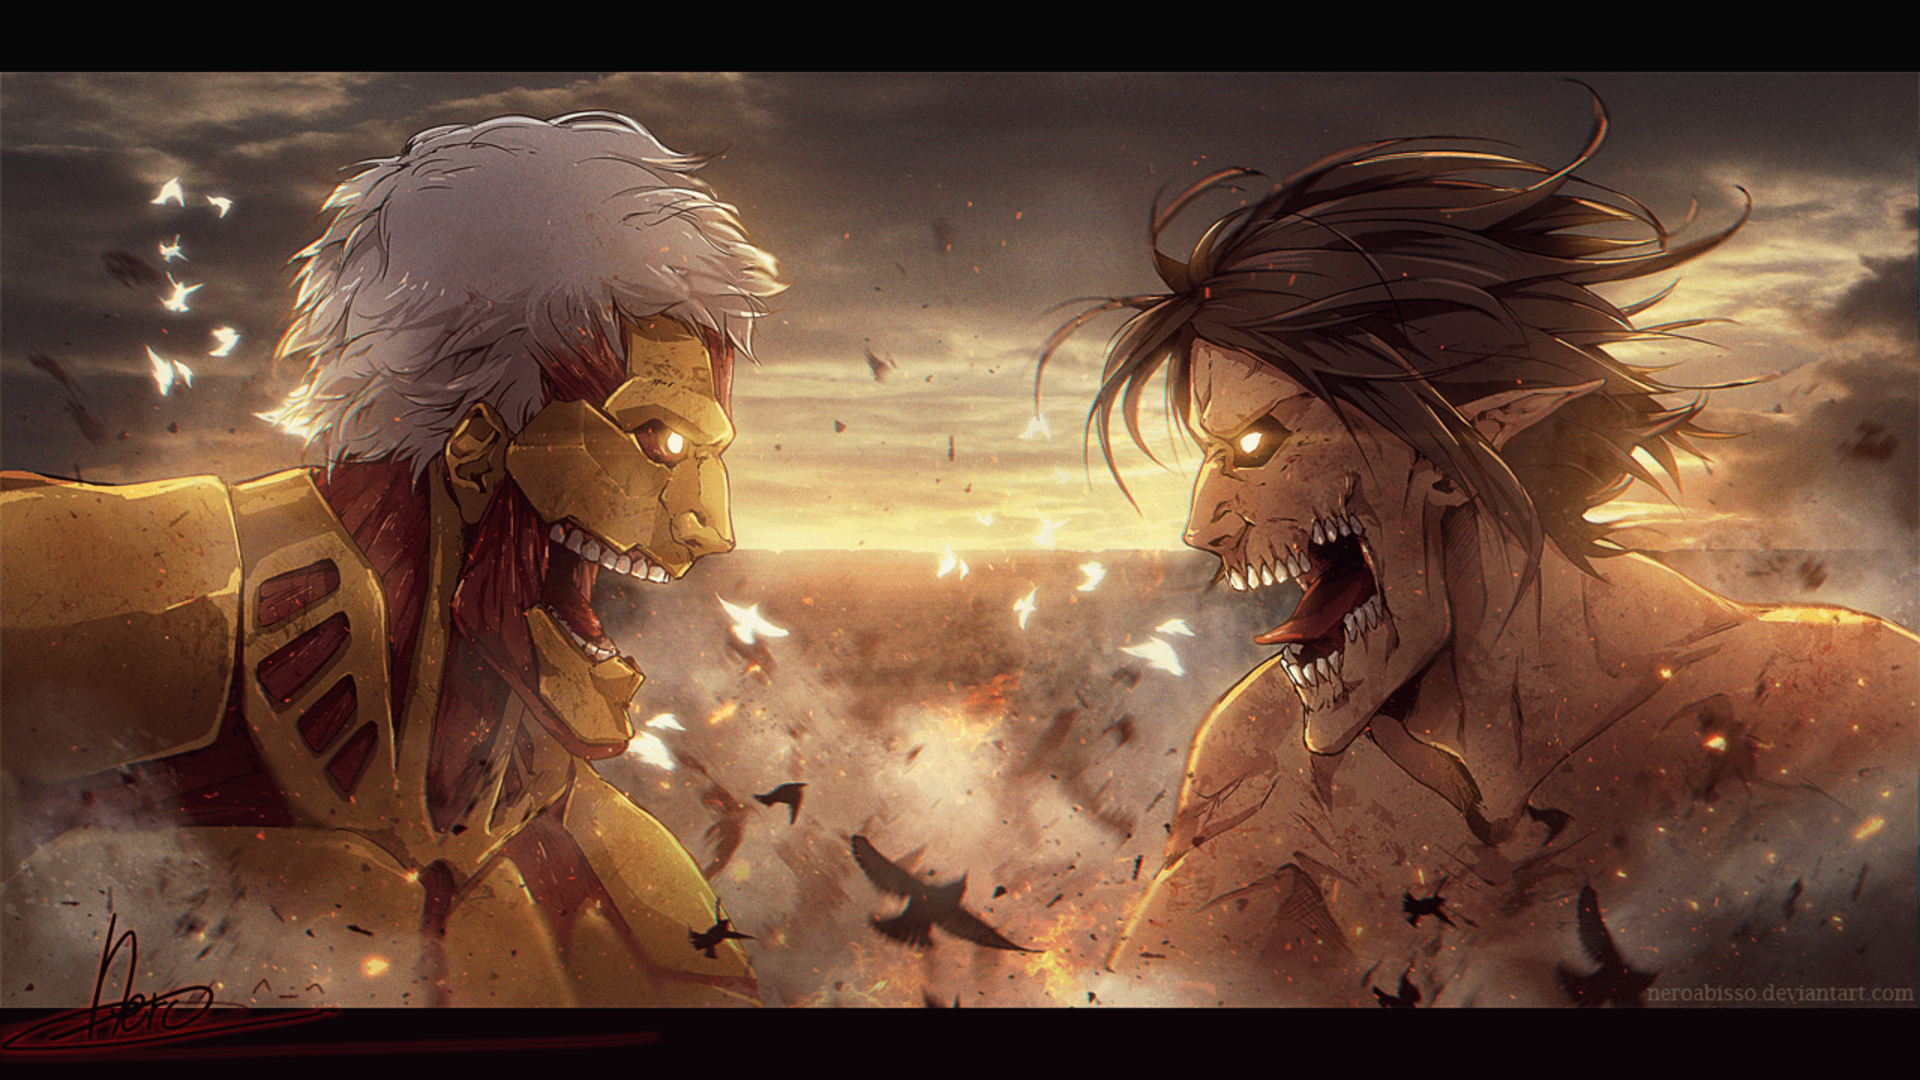 Attack on Titan» 1080P, 2k, 4k HD wallpapers, backgrounds free download |  Rare Gallery